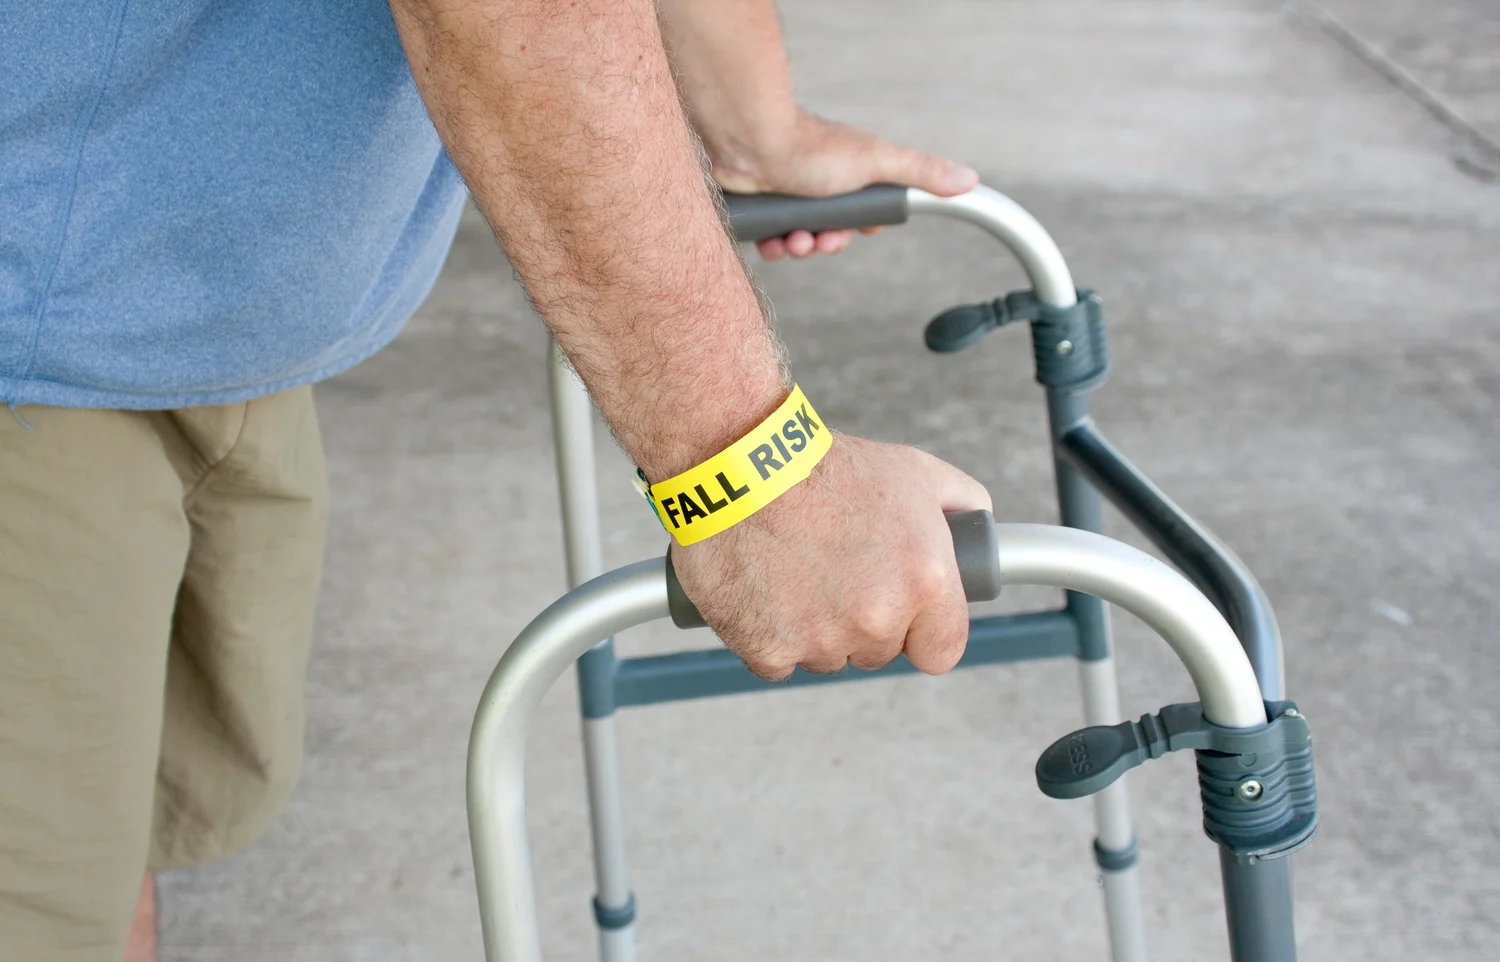 Mobility Made Easy: Walker Benefits in Orthopaedic Surgery Rehabilitation